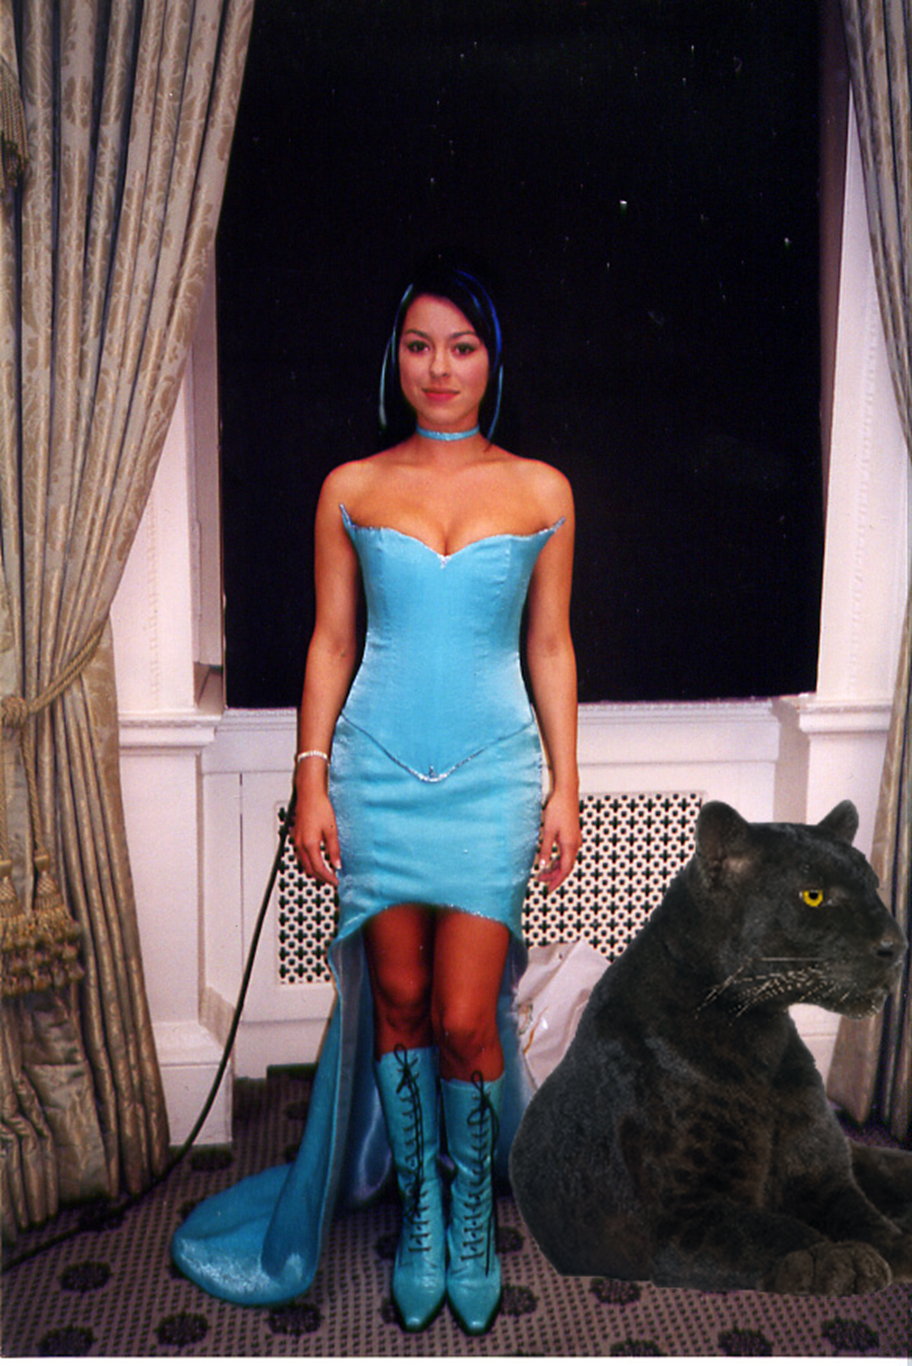 Steps Lisa Scott-Lee and the Panther by Bandidude on DeviantArt